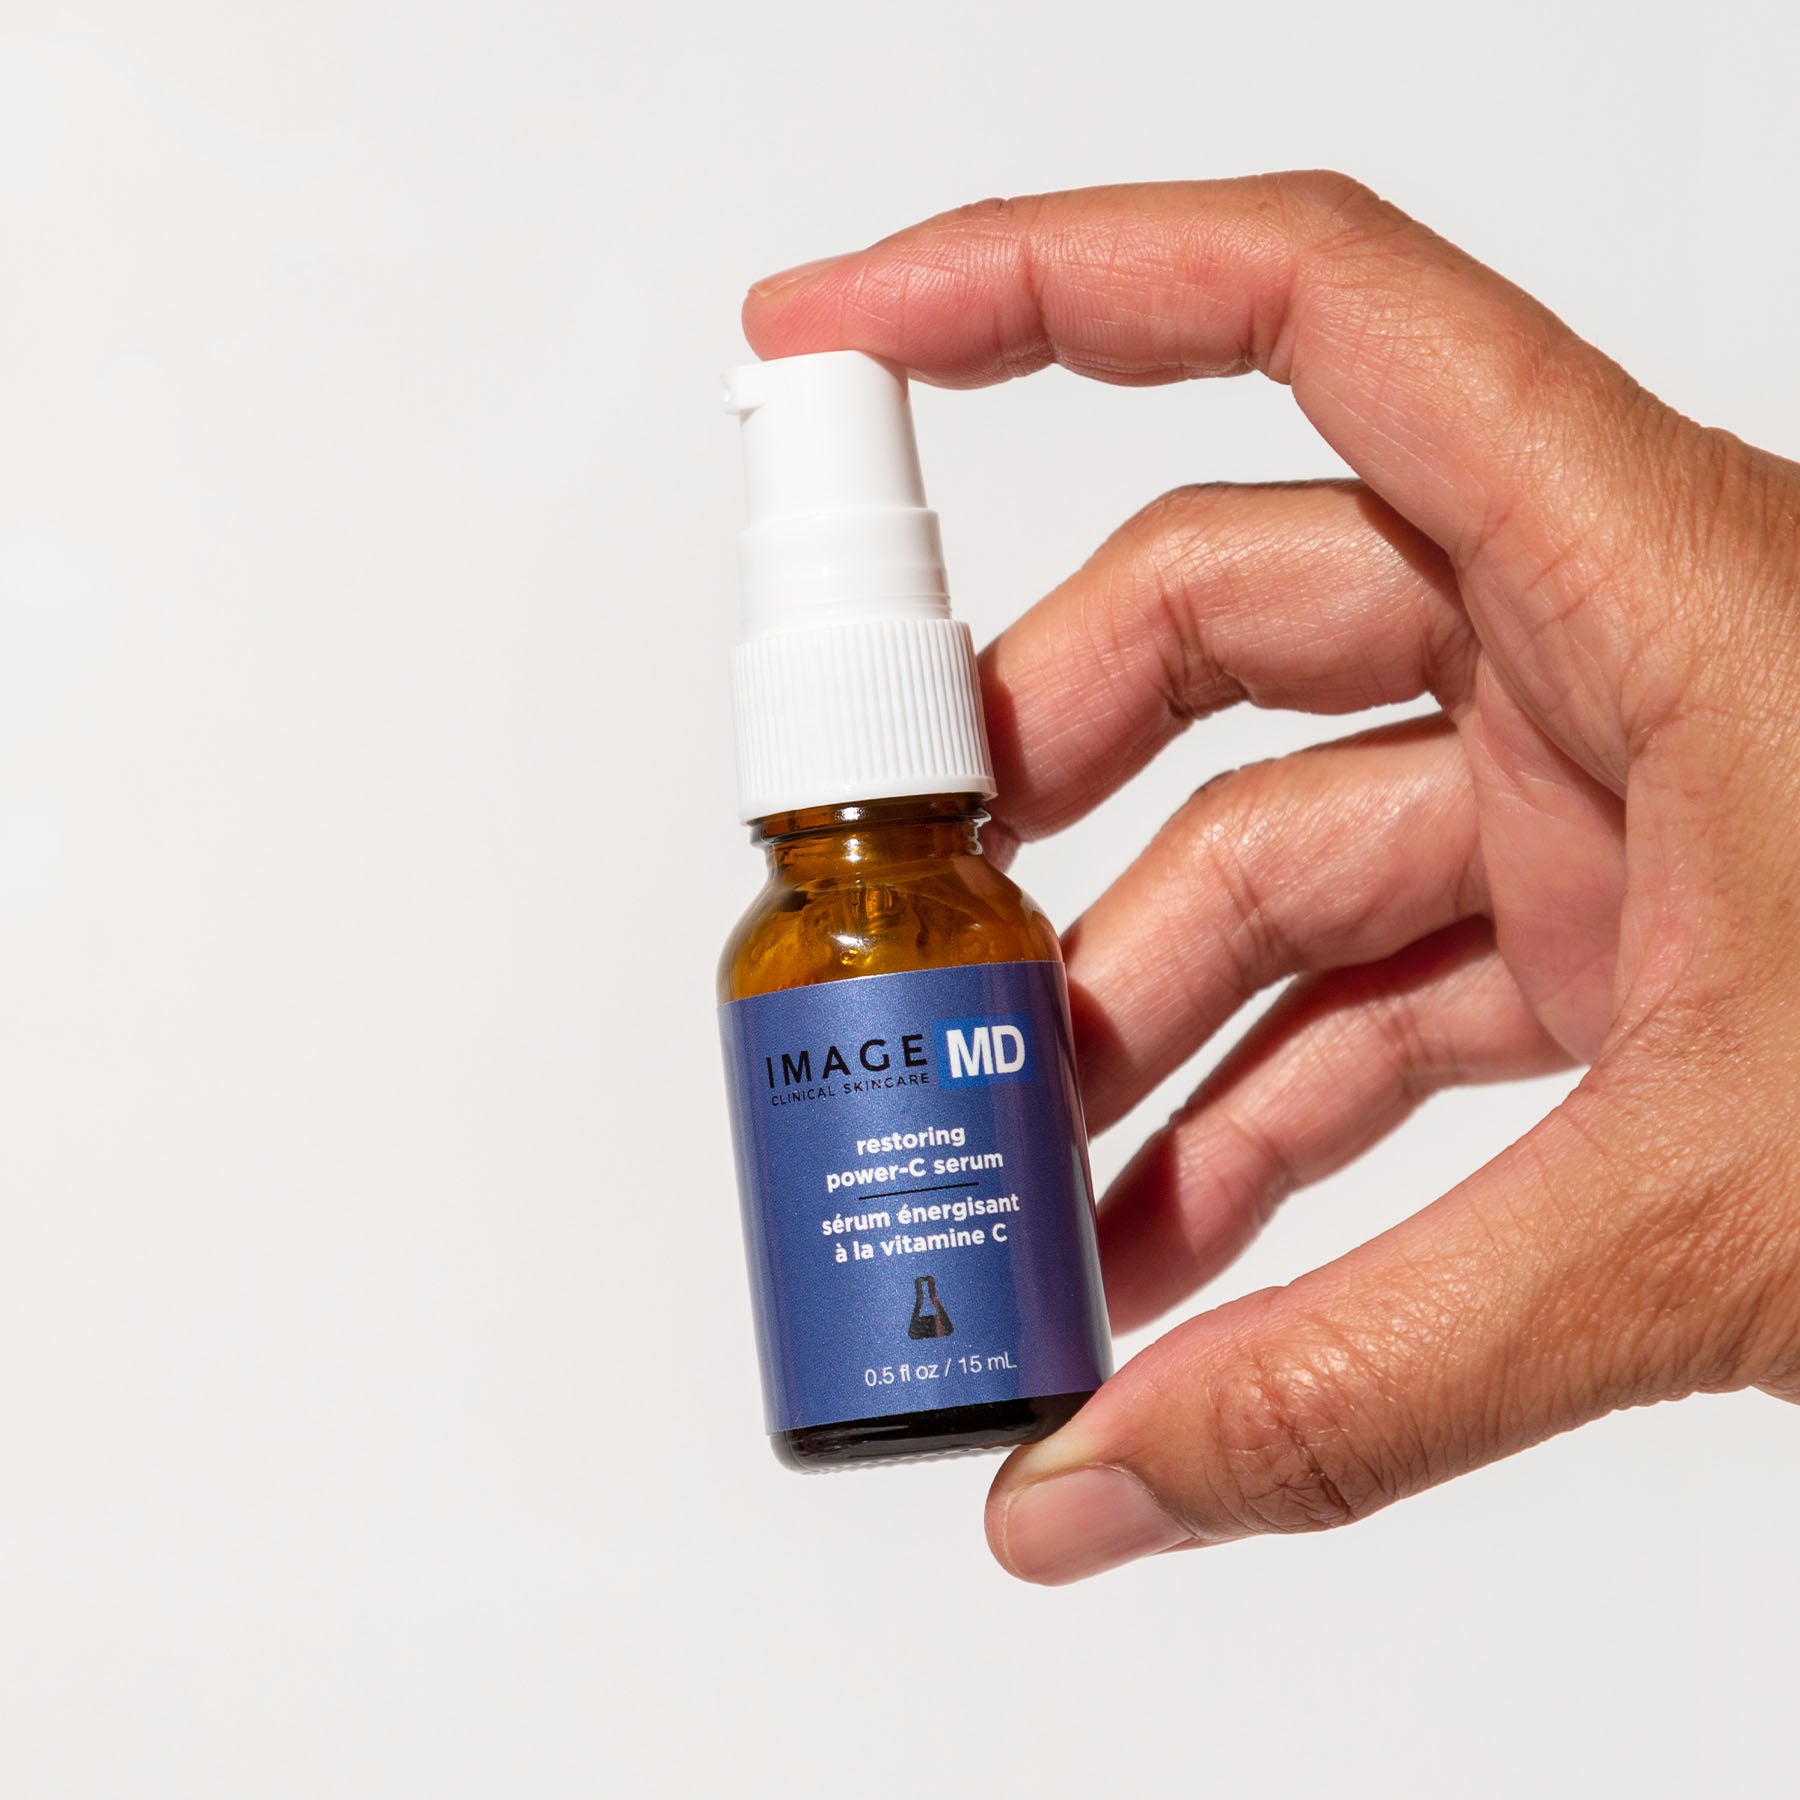 IMAGE MD® restoring power-C serum discovery-size